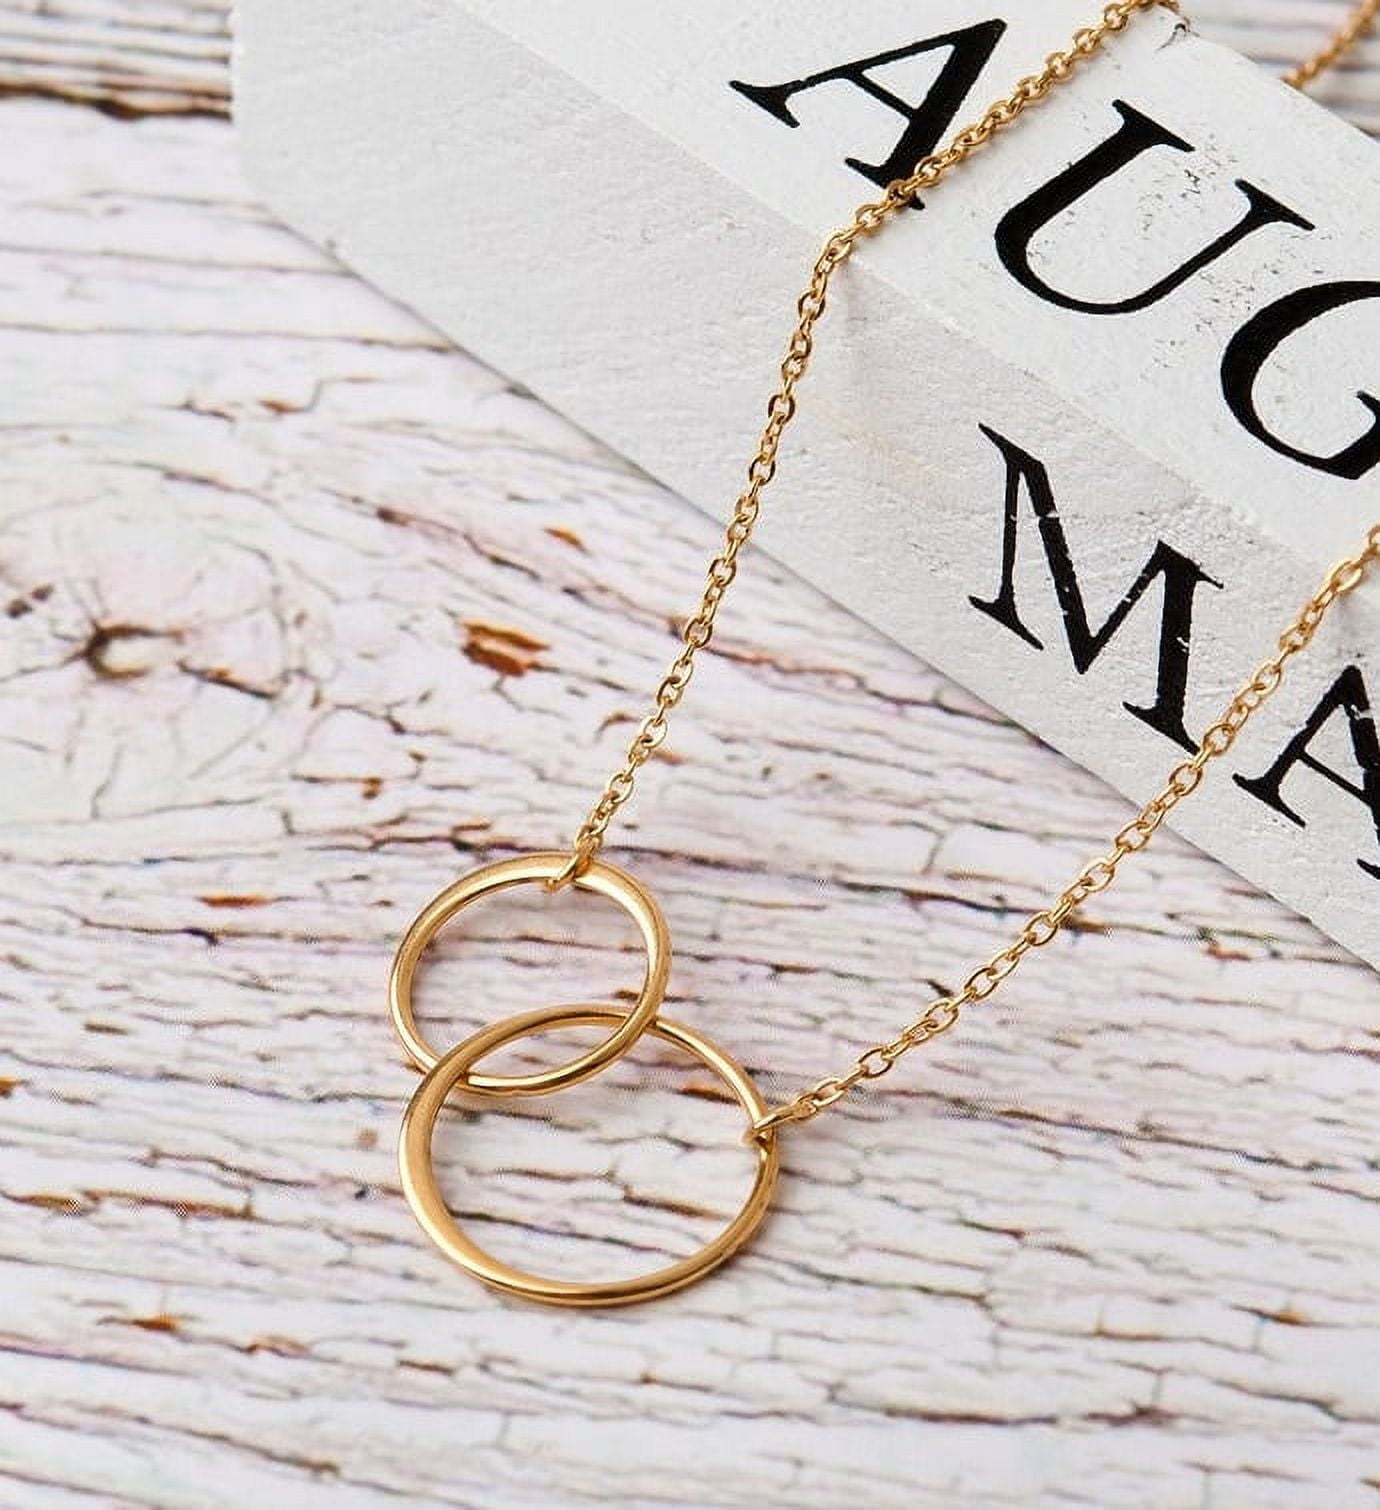 Tiny Interlocking Hammered Circle Necklace Holiday Christmas Gift Best  Friend Circle Necklace Gold Entwined Circle Delicate Lightweight - Etsy | Interlocking  circle necklace, Gold circle necklace, Friend necklaces